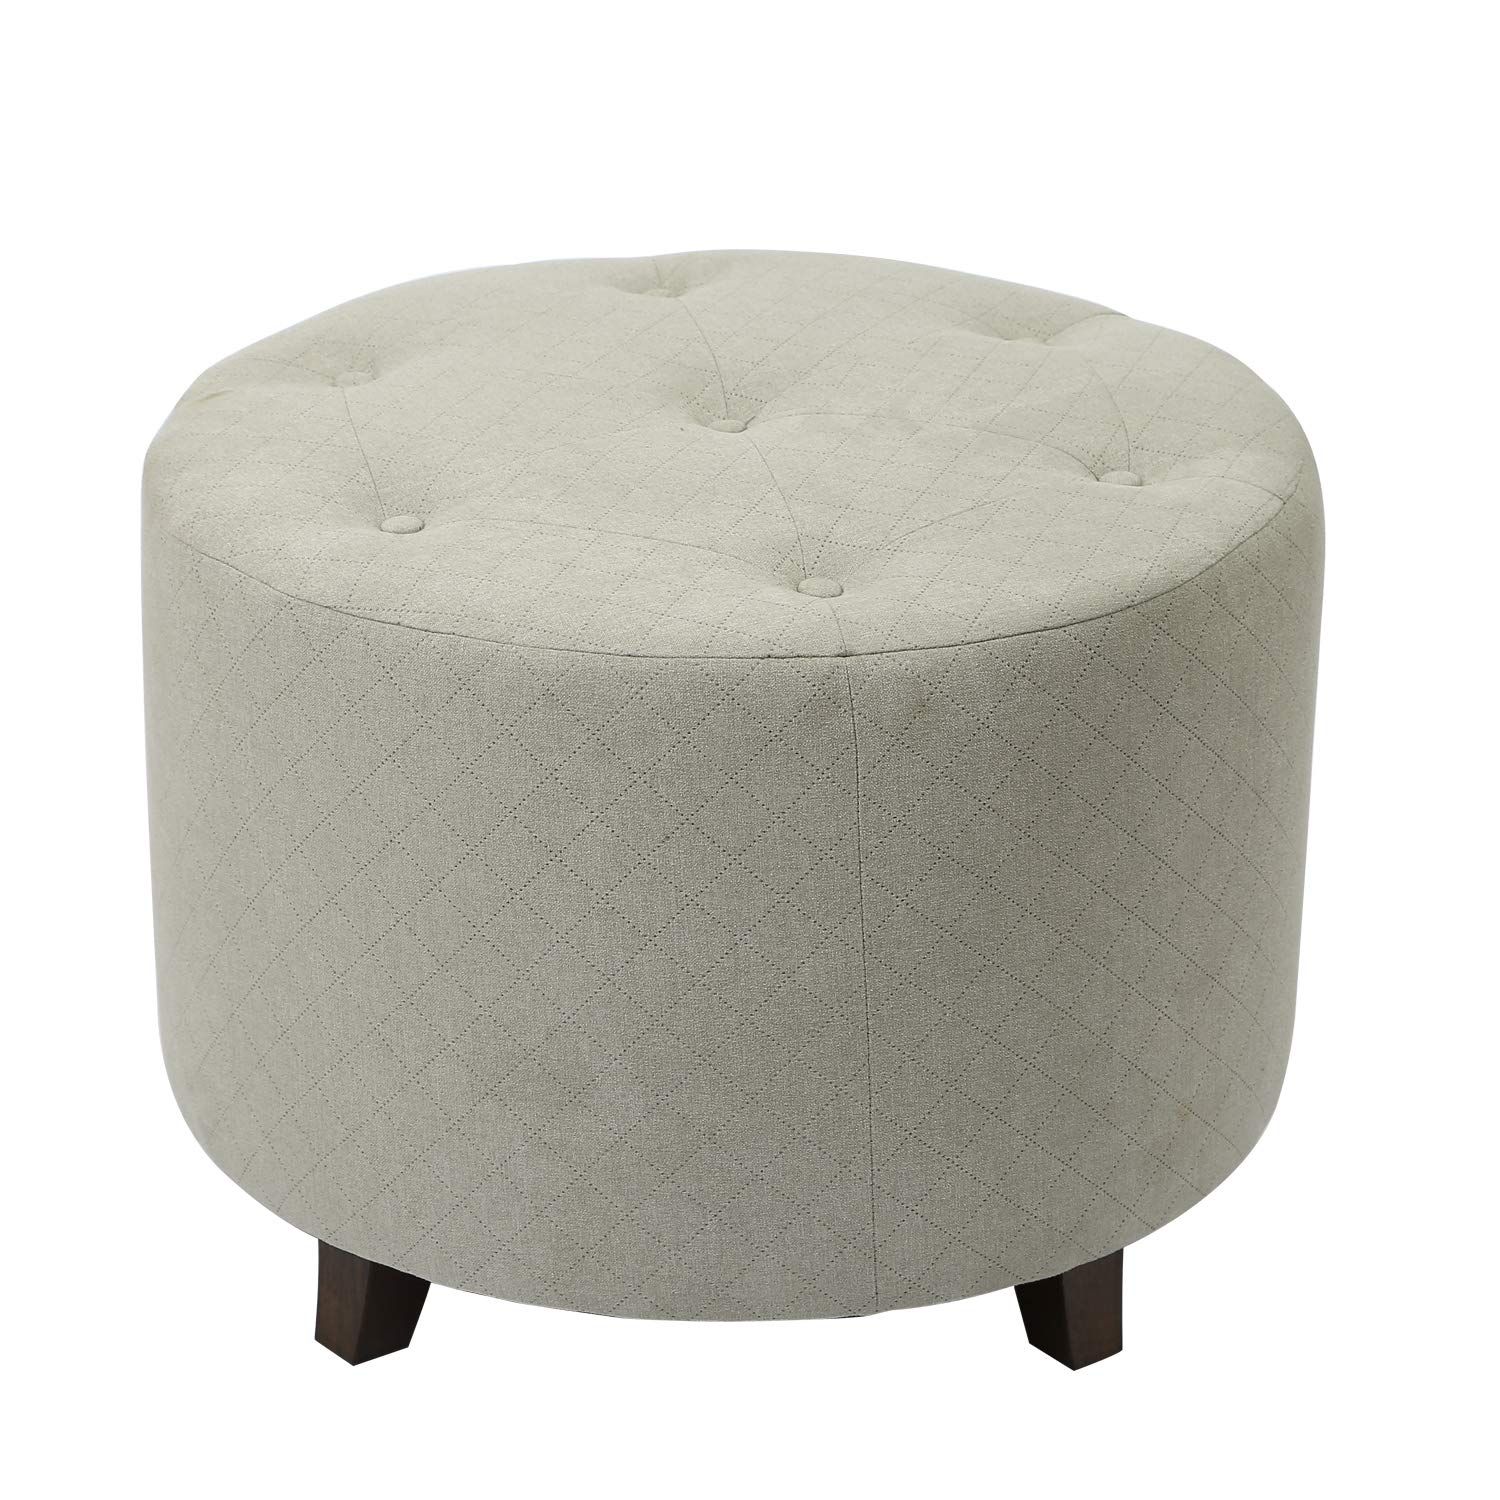 Adeco Ft0273 1 Round, Fabric Foot Rest And Seat, Modern Button Tufted Intended For Light Gray Fabric Tufted Round Storage Ottomans (View 14 of 20)